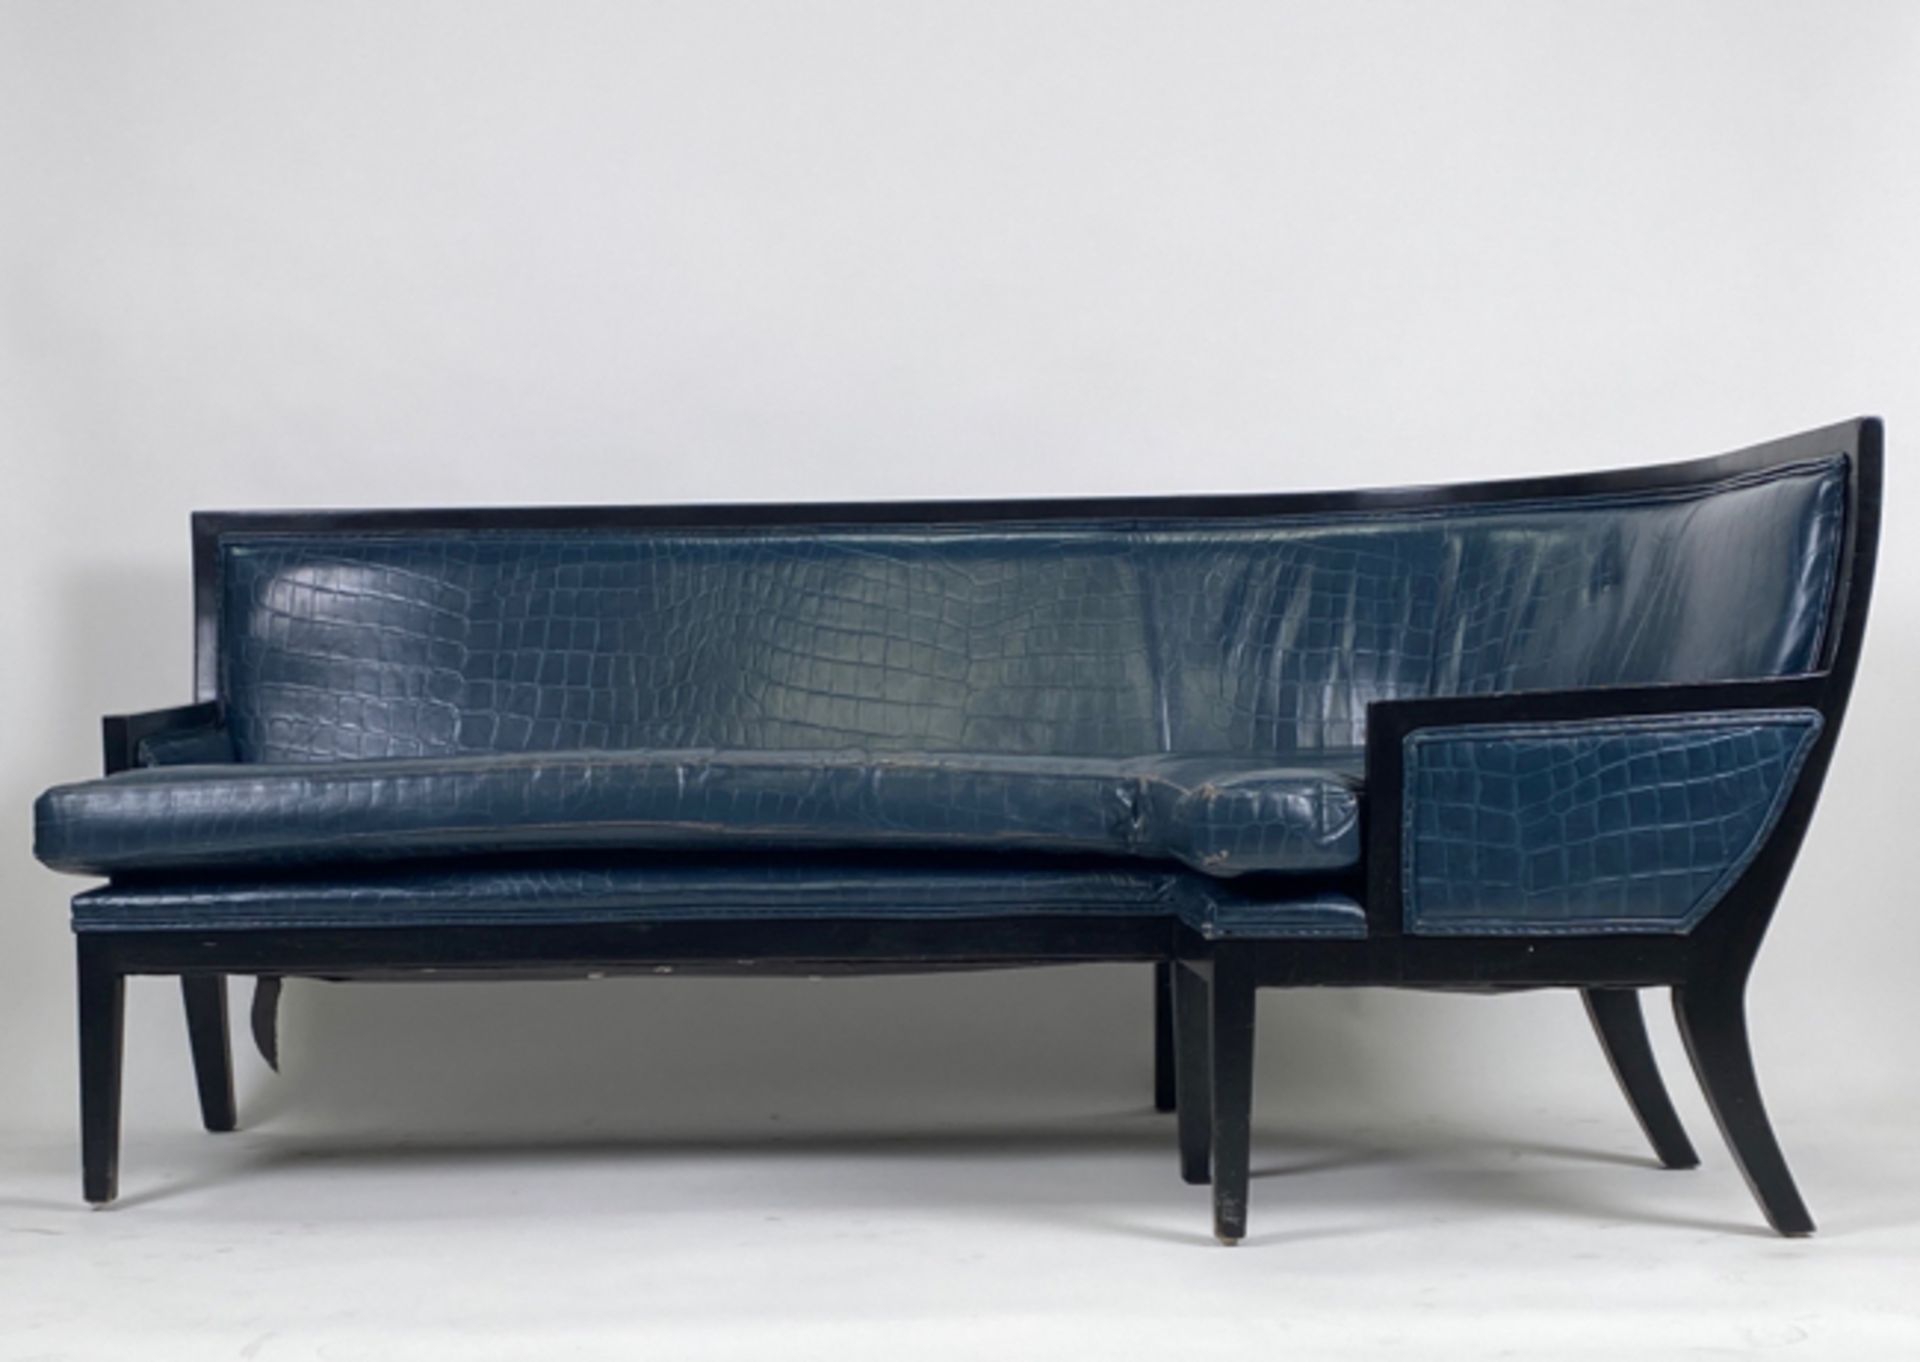 Iconic Berkeley Blue Bar Corner Sofa Commissioned by David Collins - Image 2 of 7